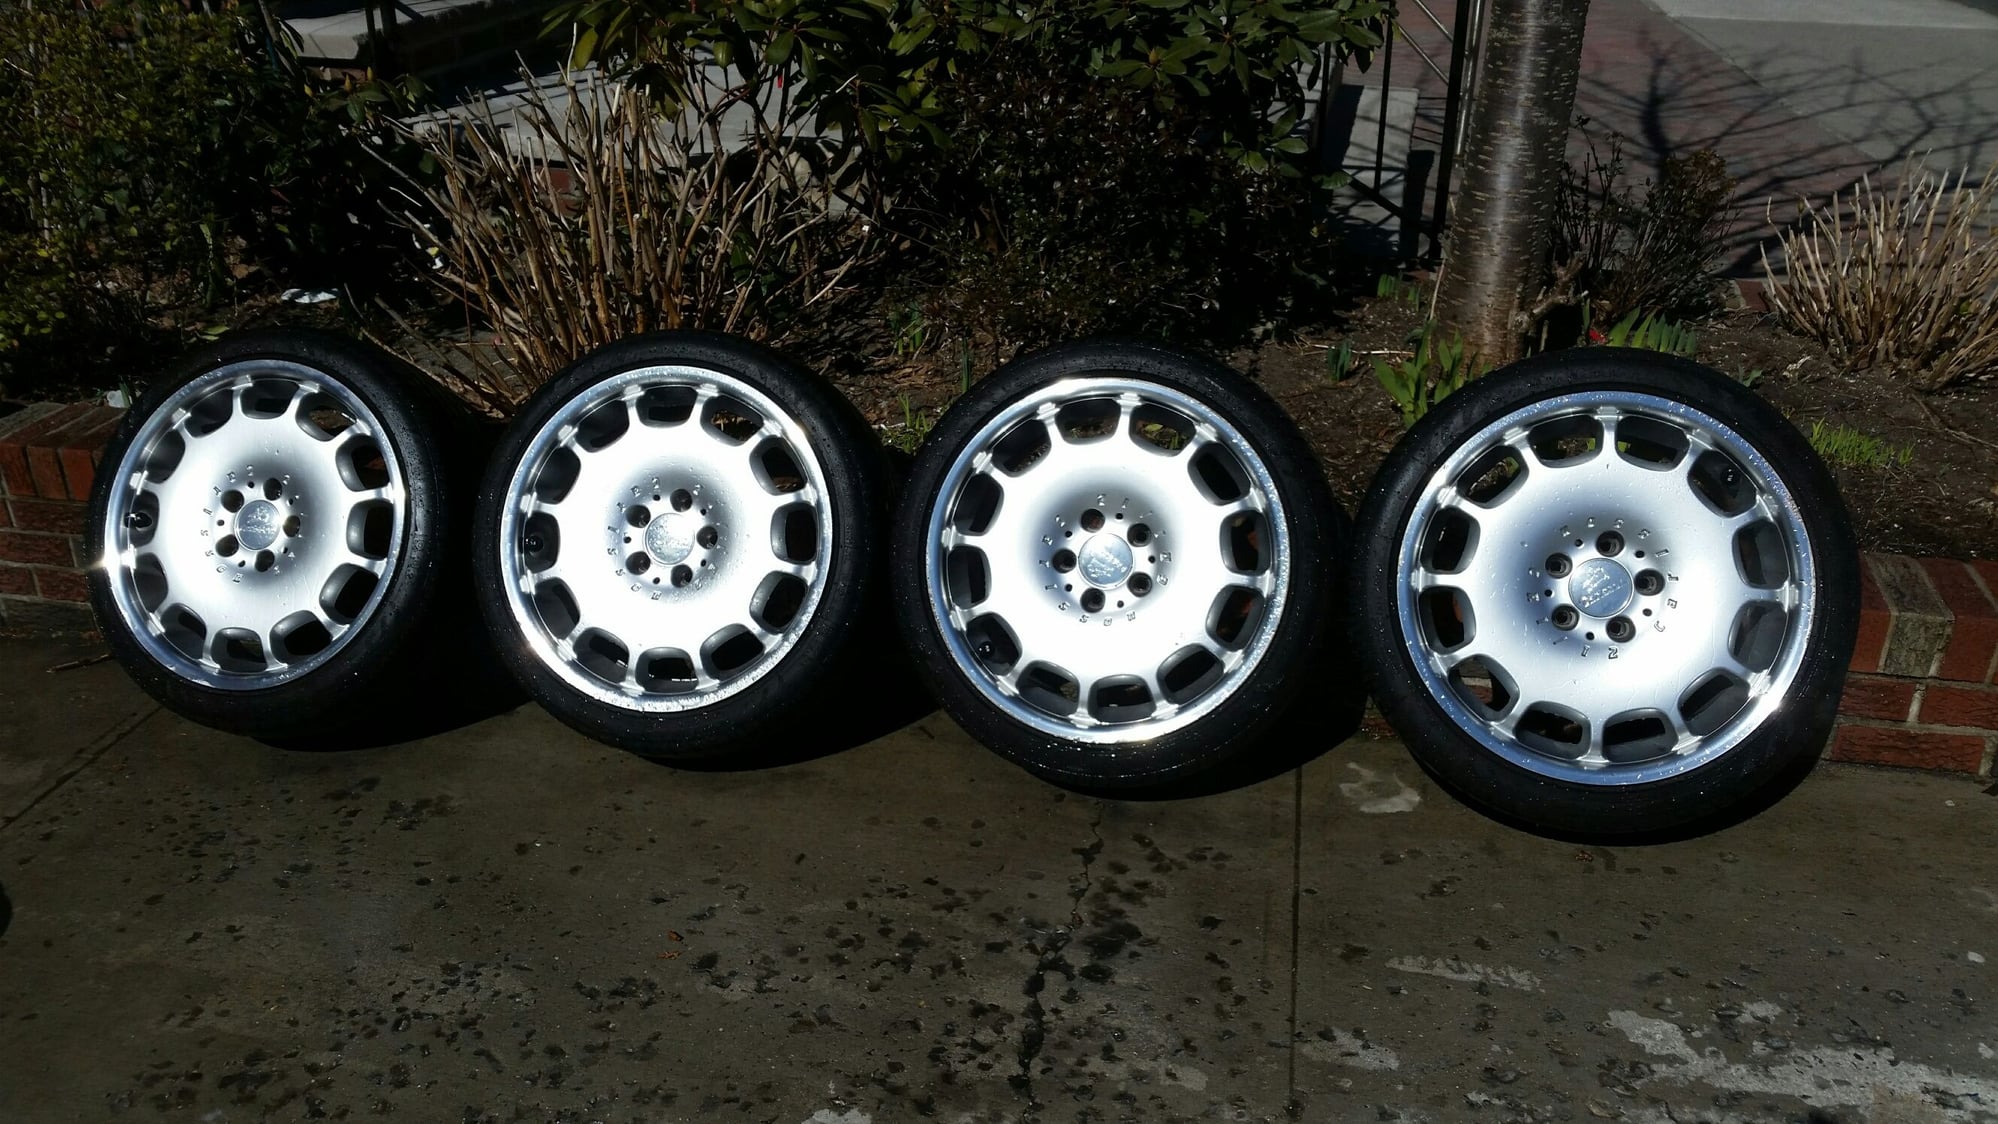 Carlsson 1 / 12 Mercedes 5x112 8x18" Wheels and tires, Old School! Rare